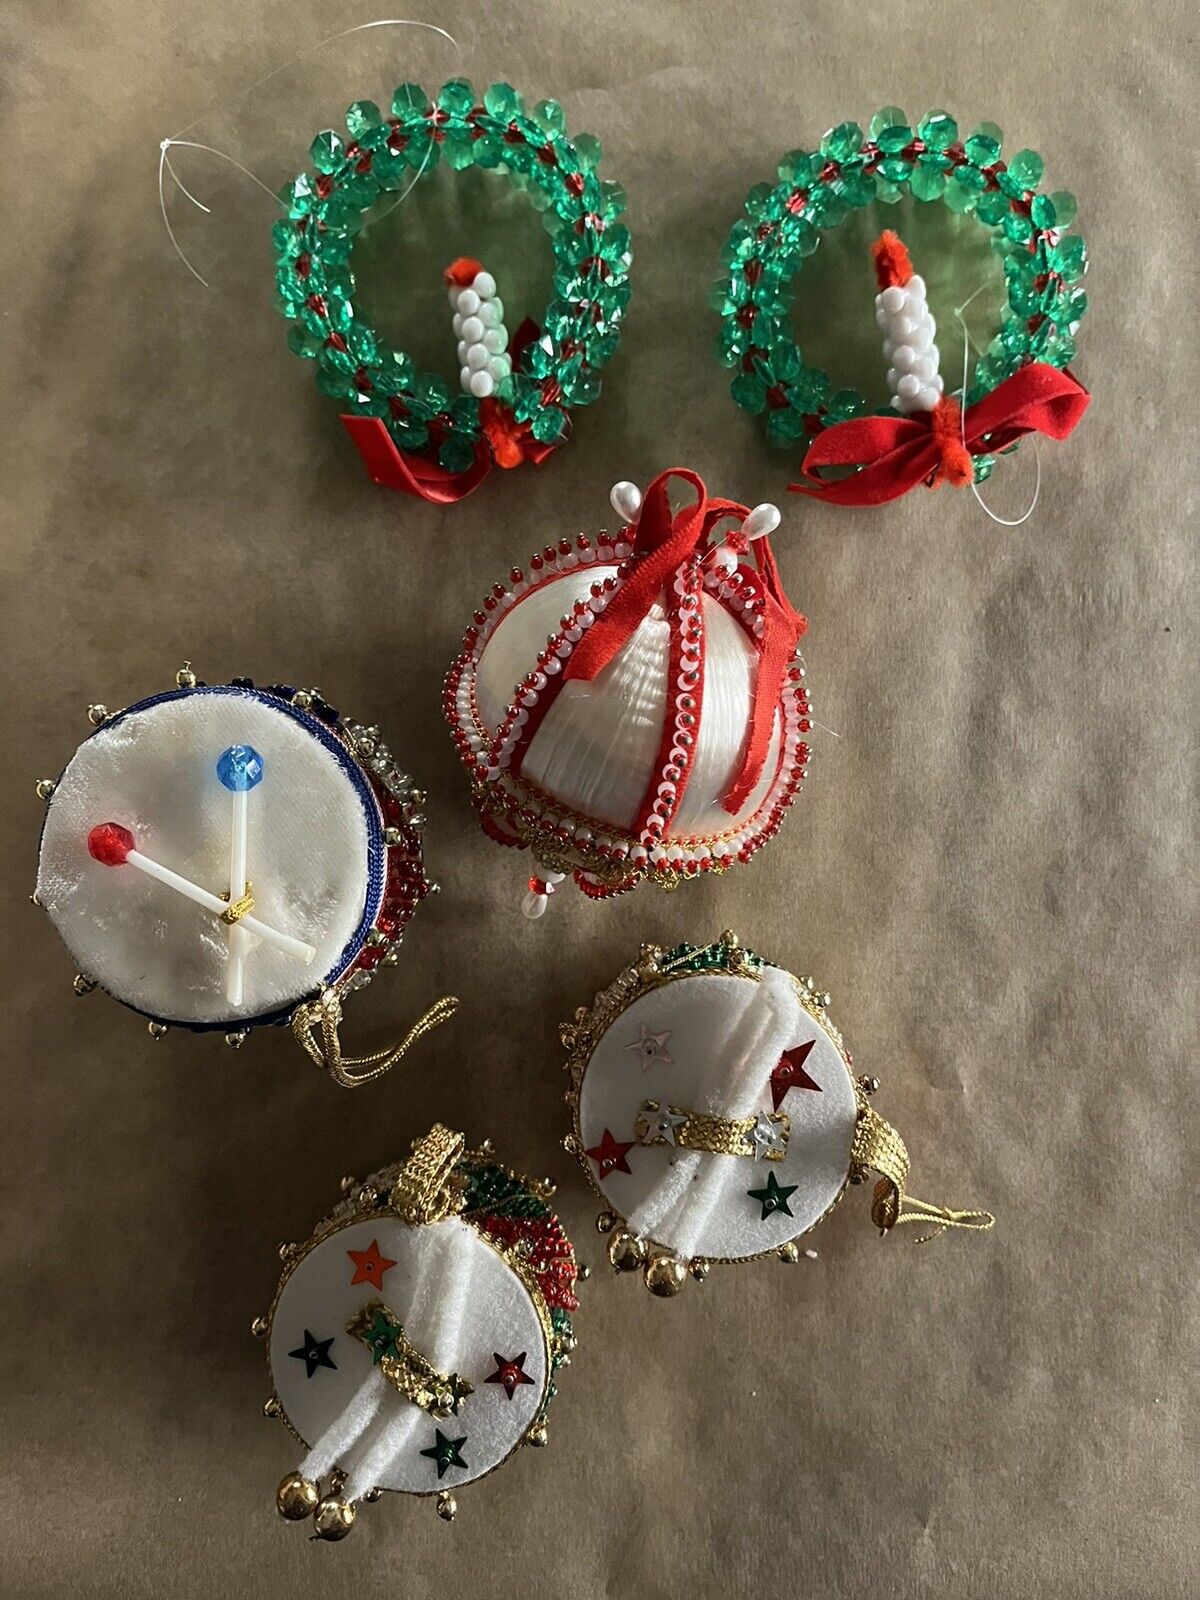 Lot of 6 handmade Christmas ornaments push pin sequin satin green red drums wrea